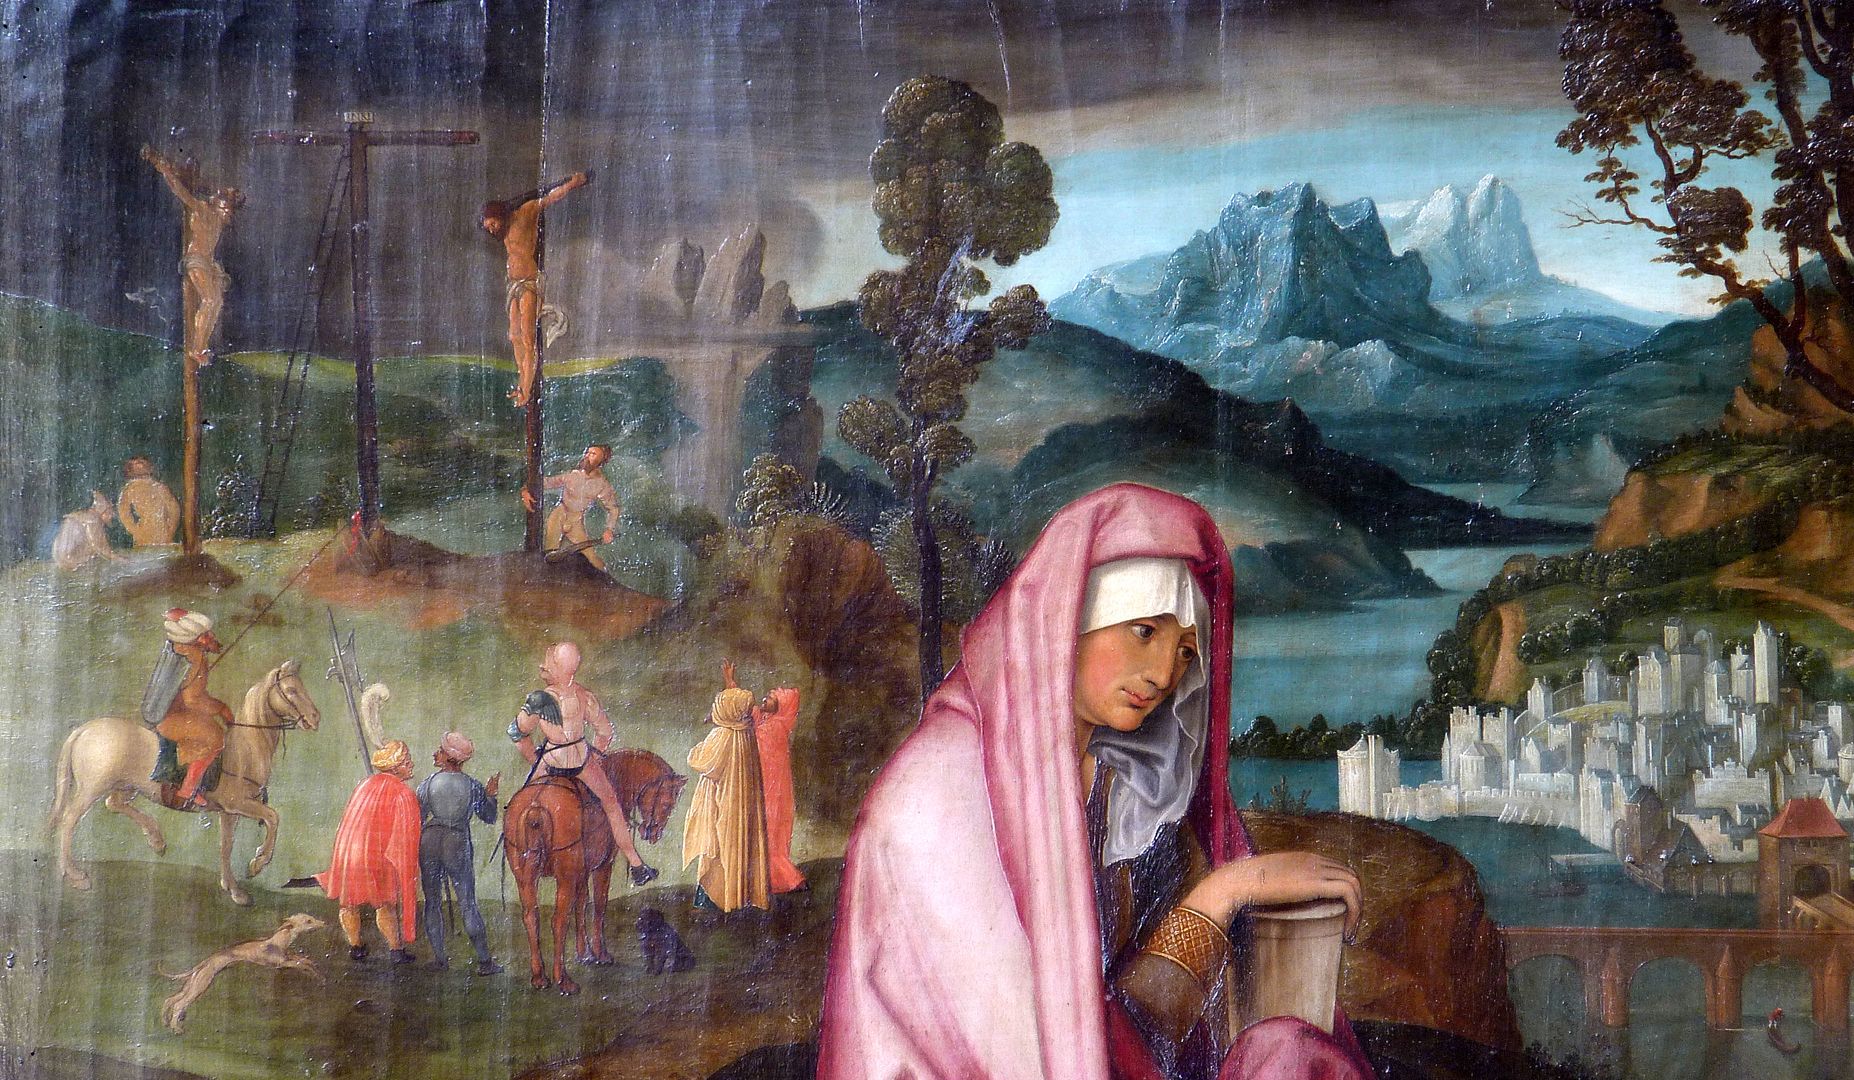 Lamentation of Christ In the background Golgotha, in front of it Mary Magdalene with an ointment vessel in her hands